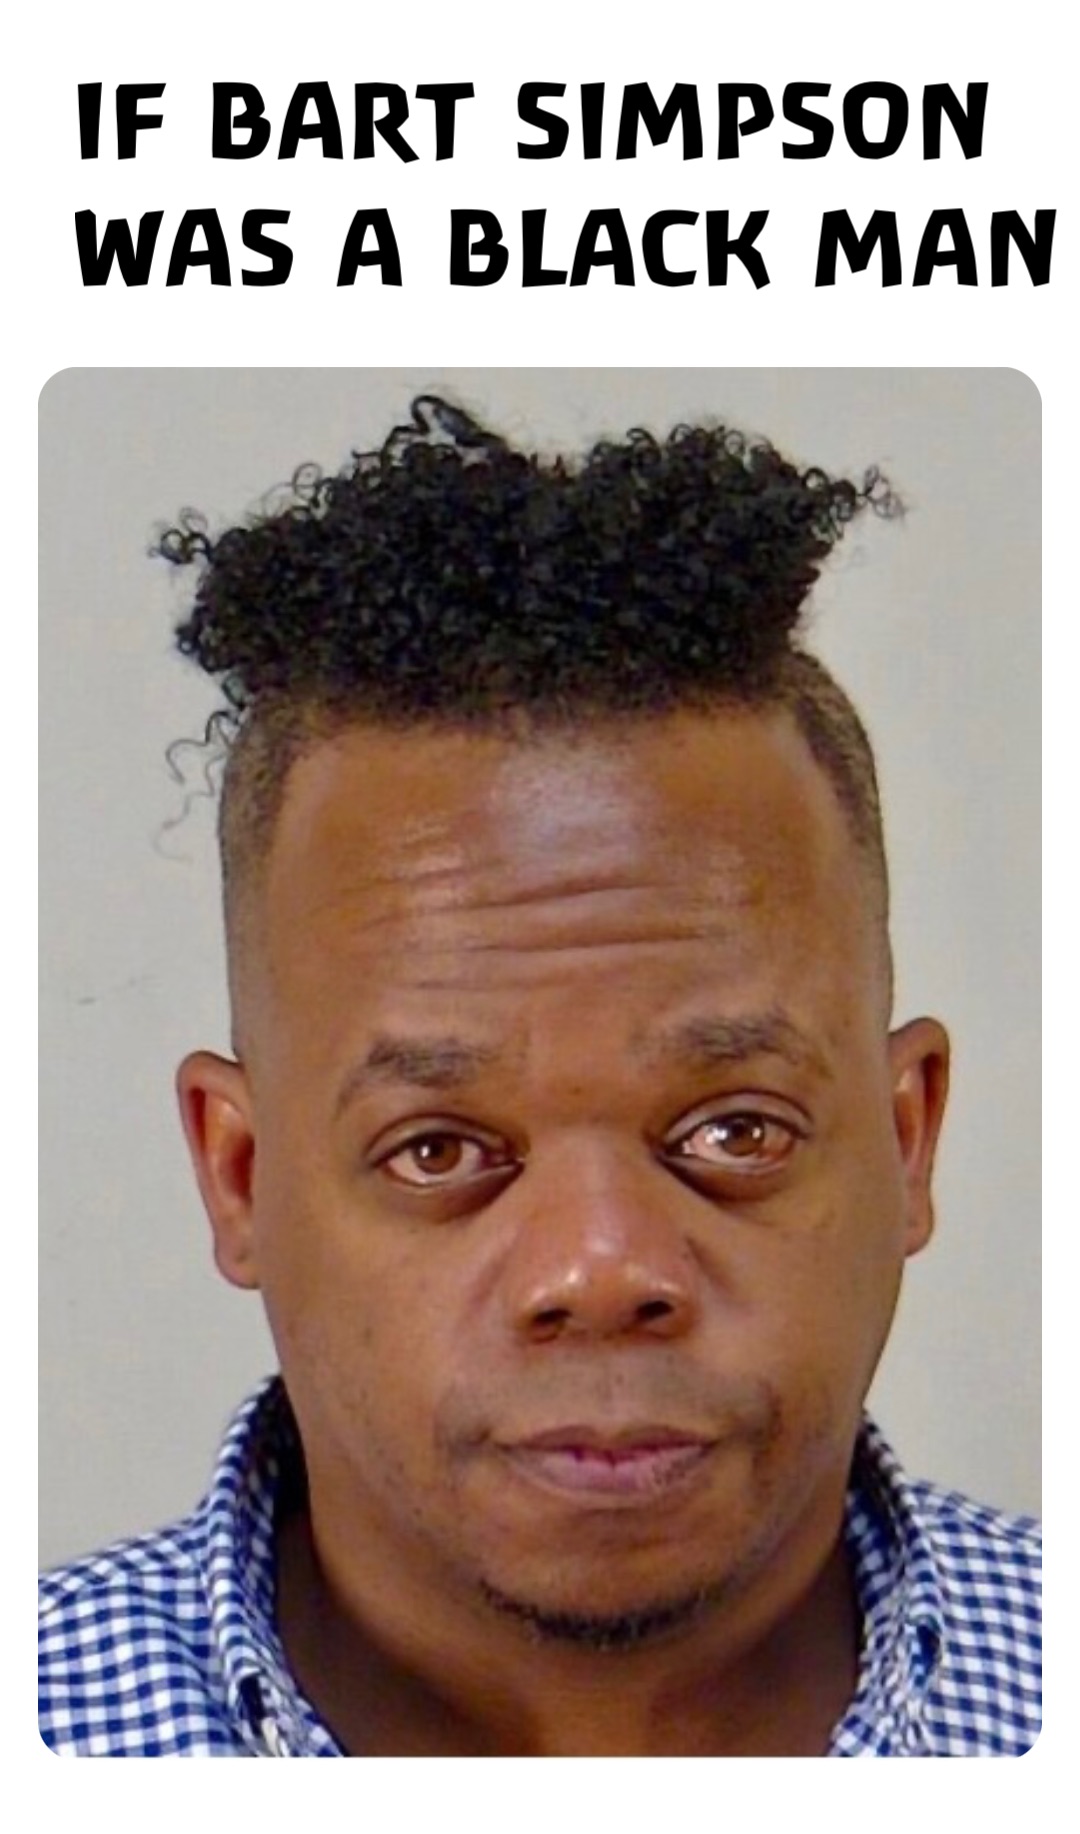 IF BART SIMPSON WAS A BLACK MAN